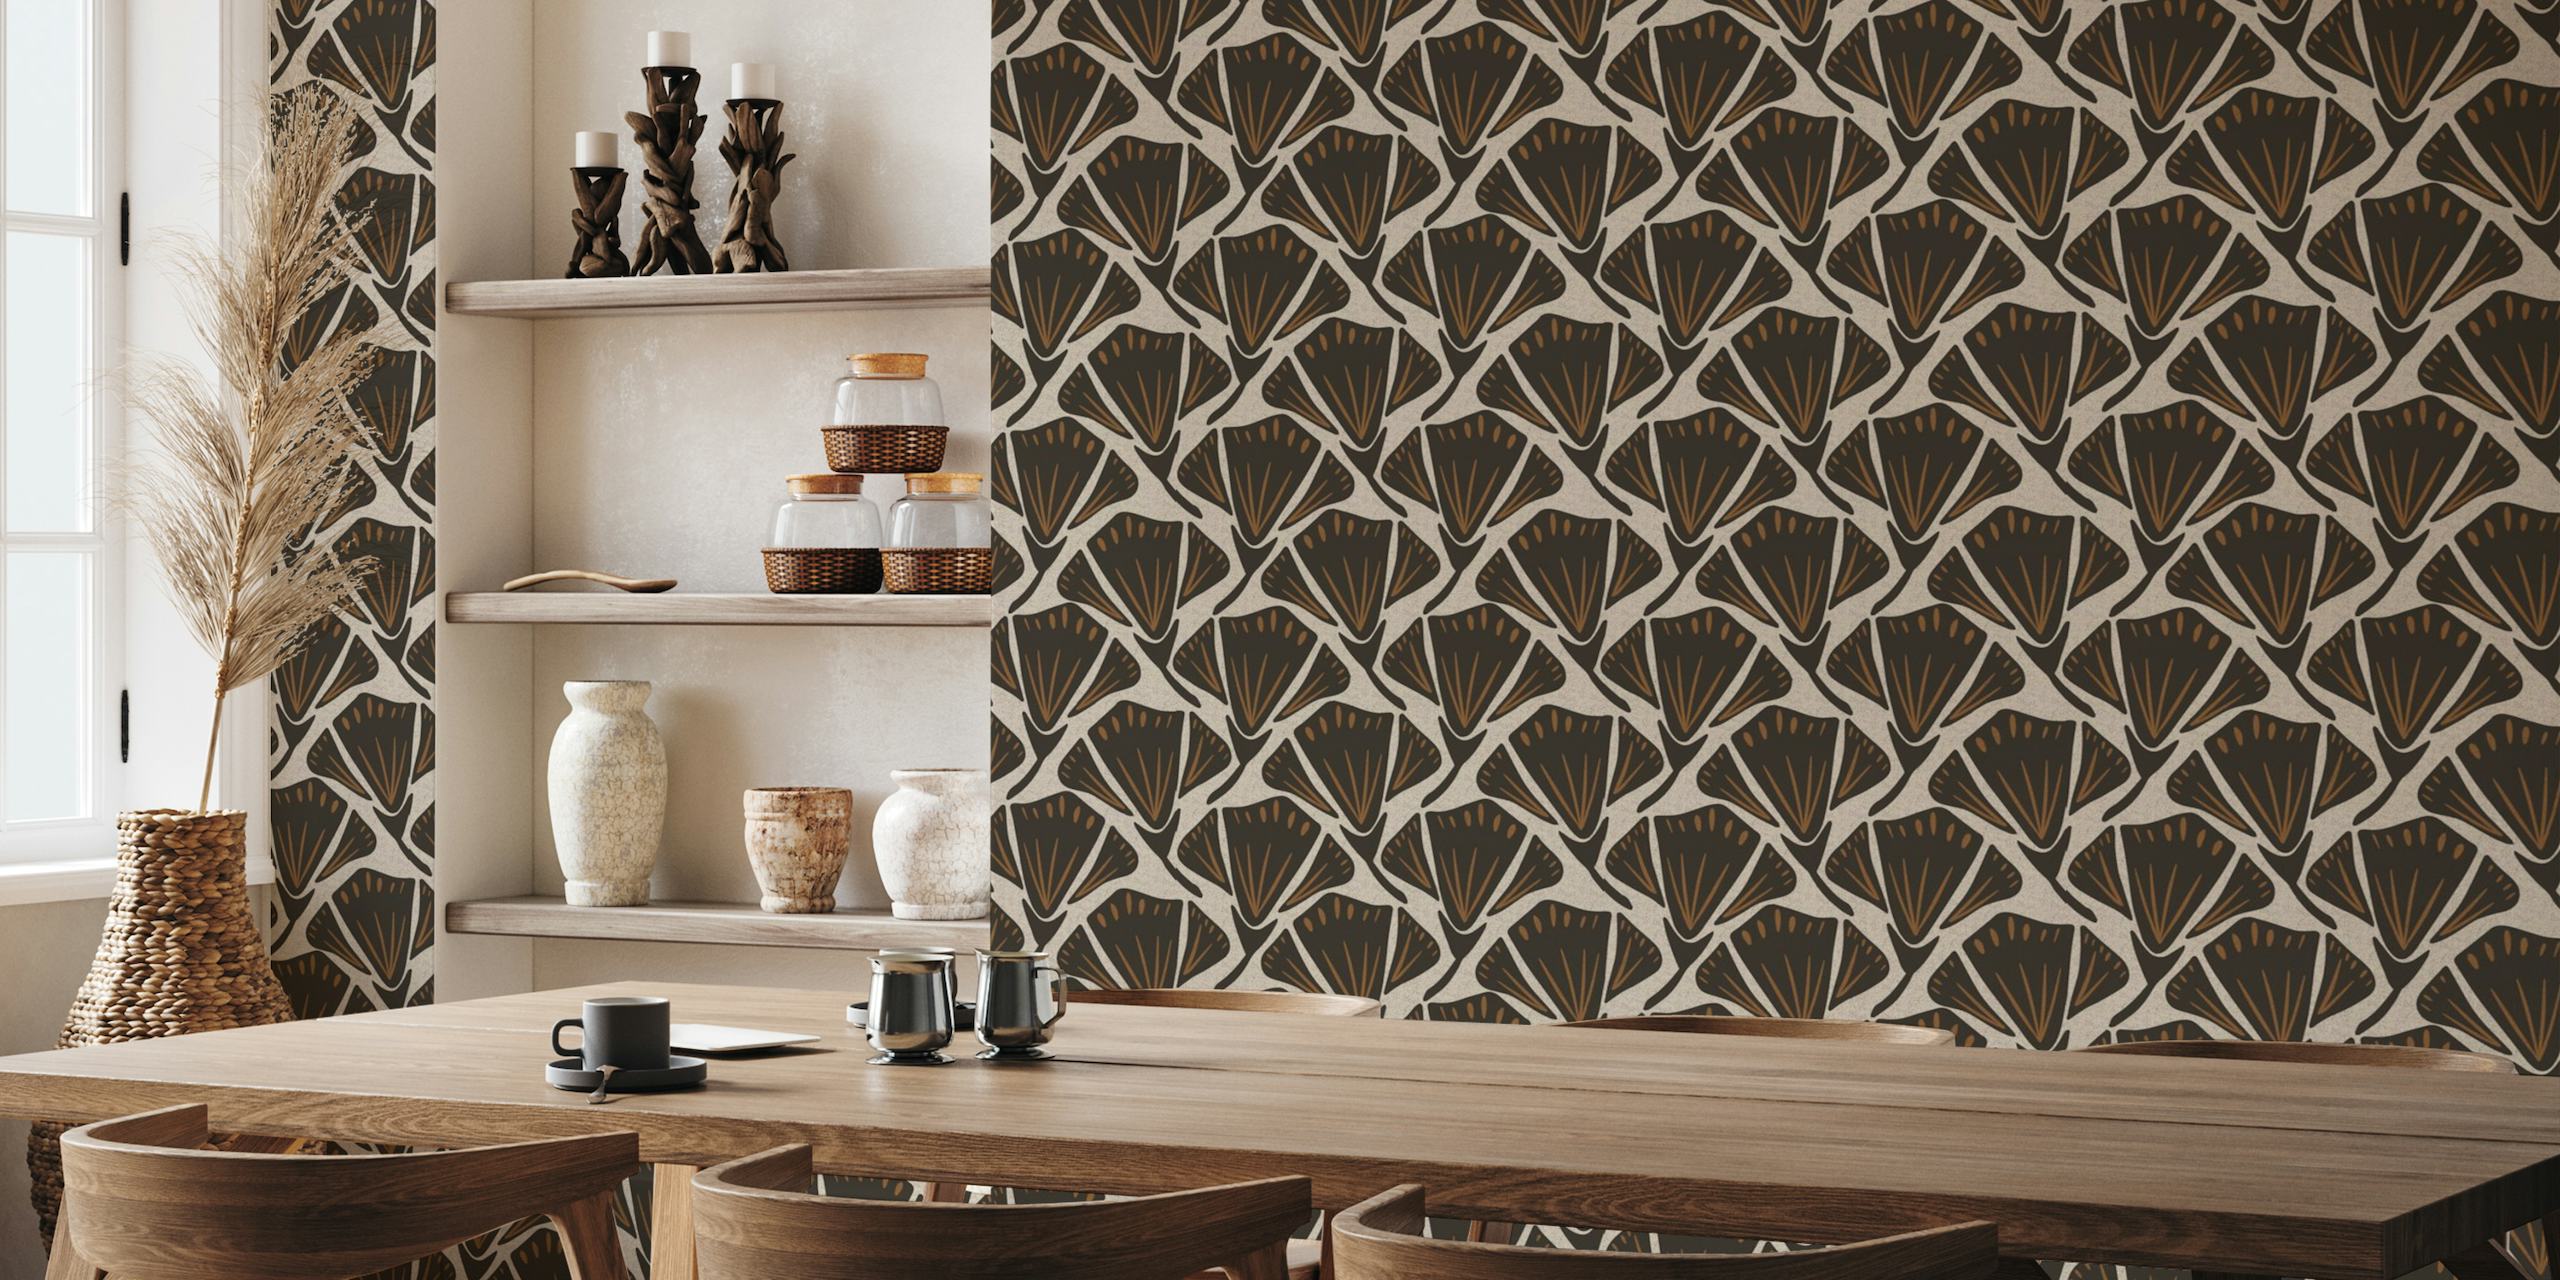 Art deco fan-shaped pattern wall mural named Mildred with a neutral color scheme.